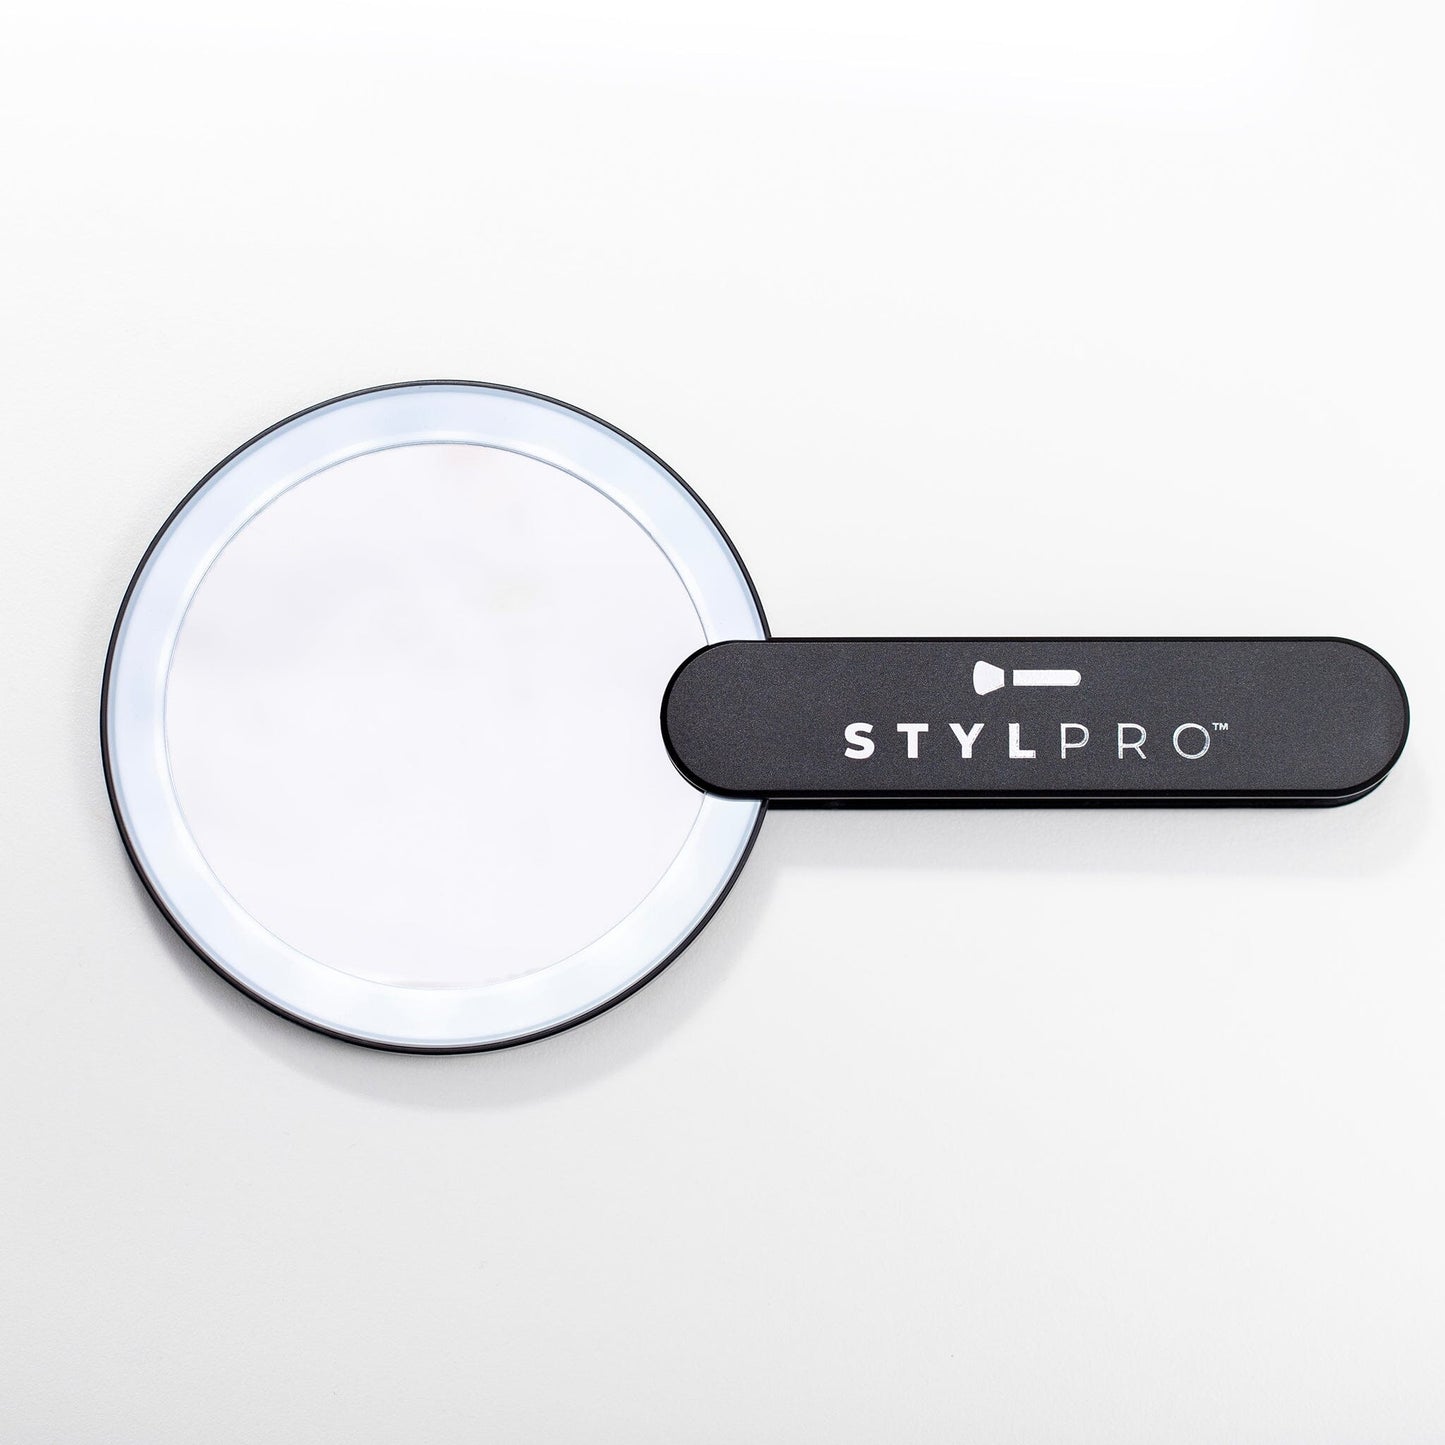 STYLPRO Twirl Me Up Hand Held Mirror